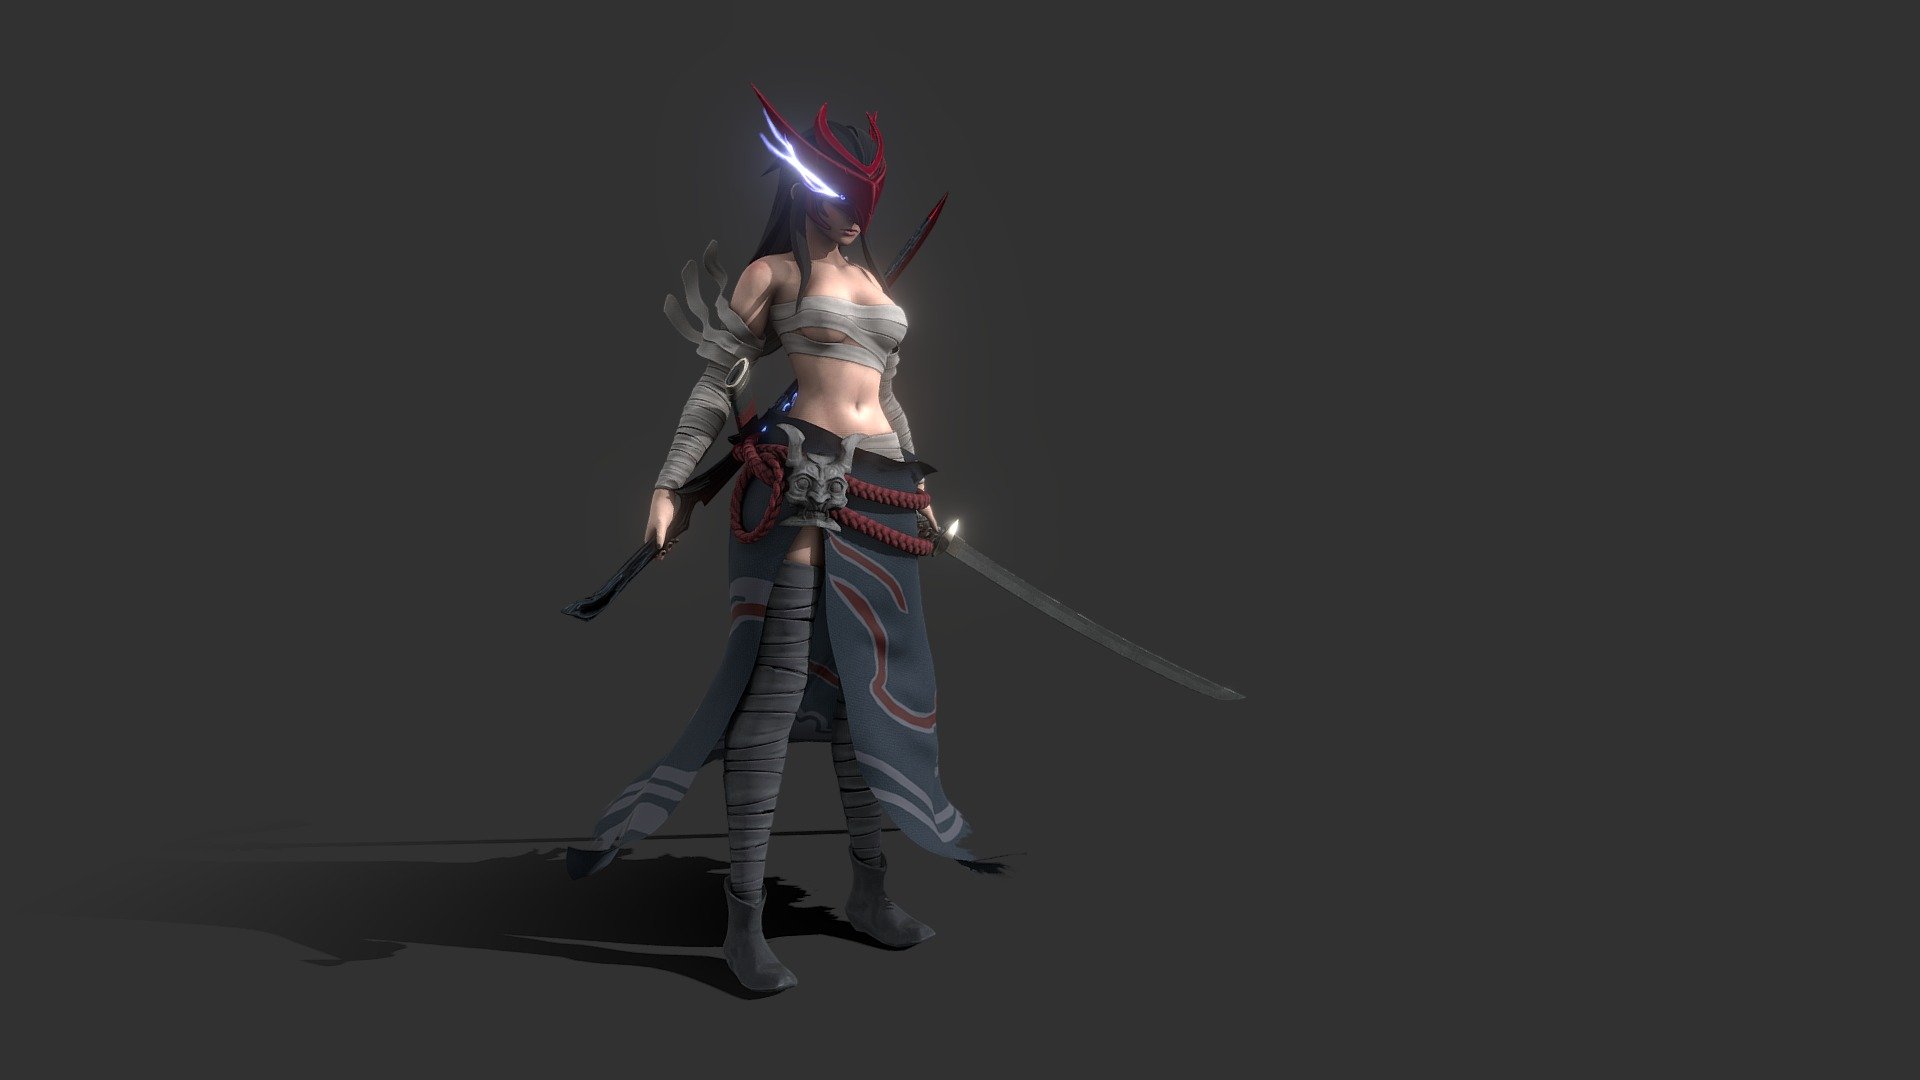 Yone from League of Legends, but female. I did some deliberate changes to fit a female version of Yone better, so it's not a complete replica. I am a huge fan of the character design and decided to give it a shot 3d model